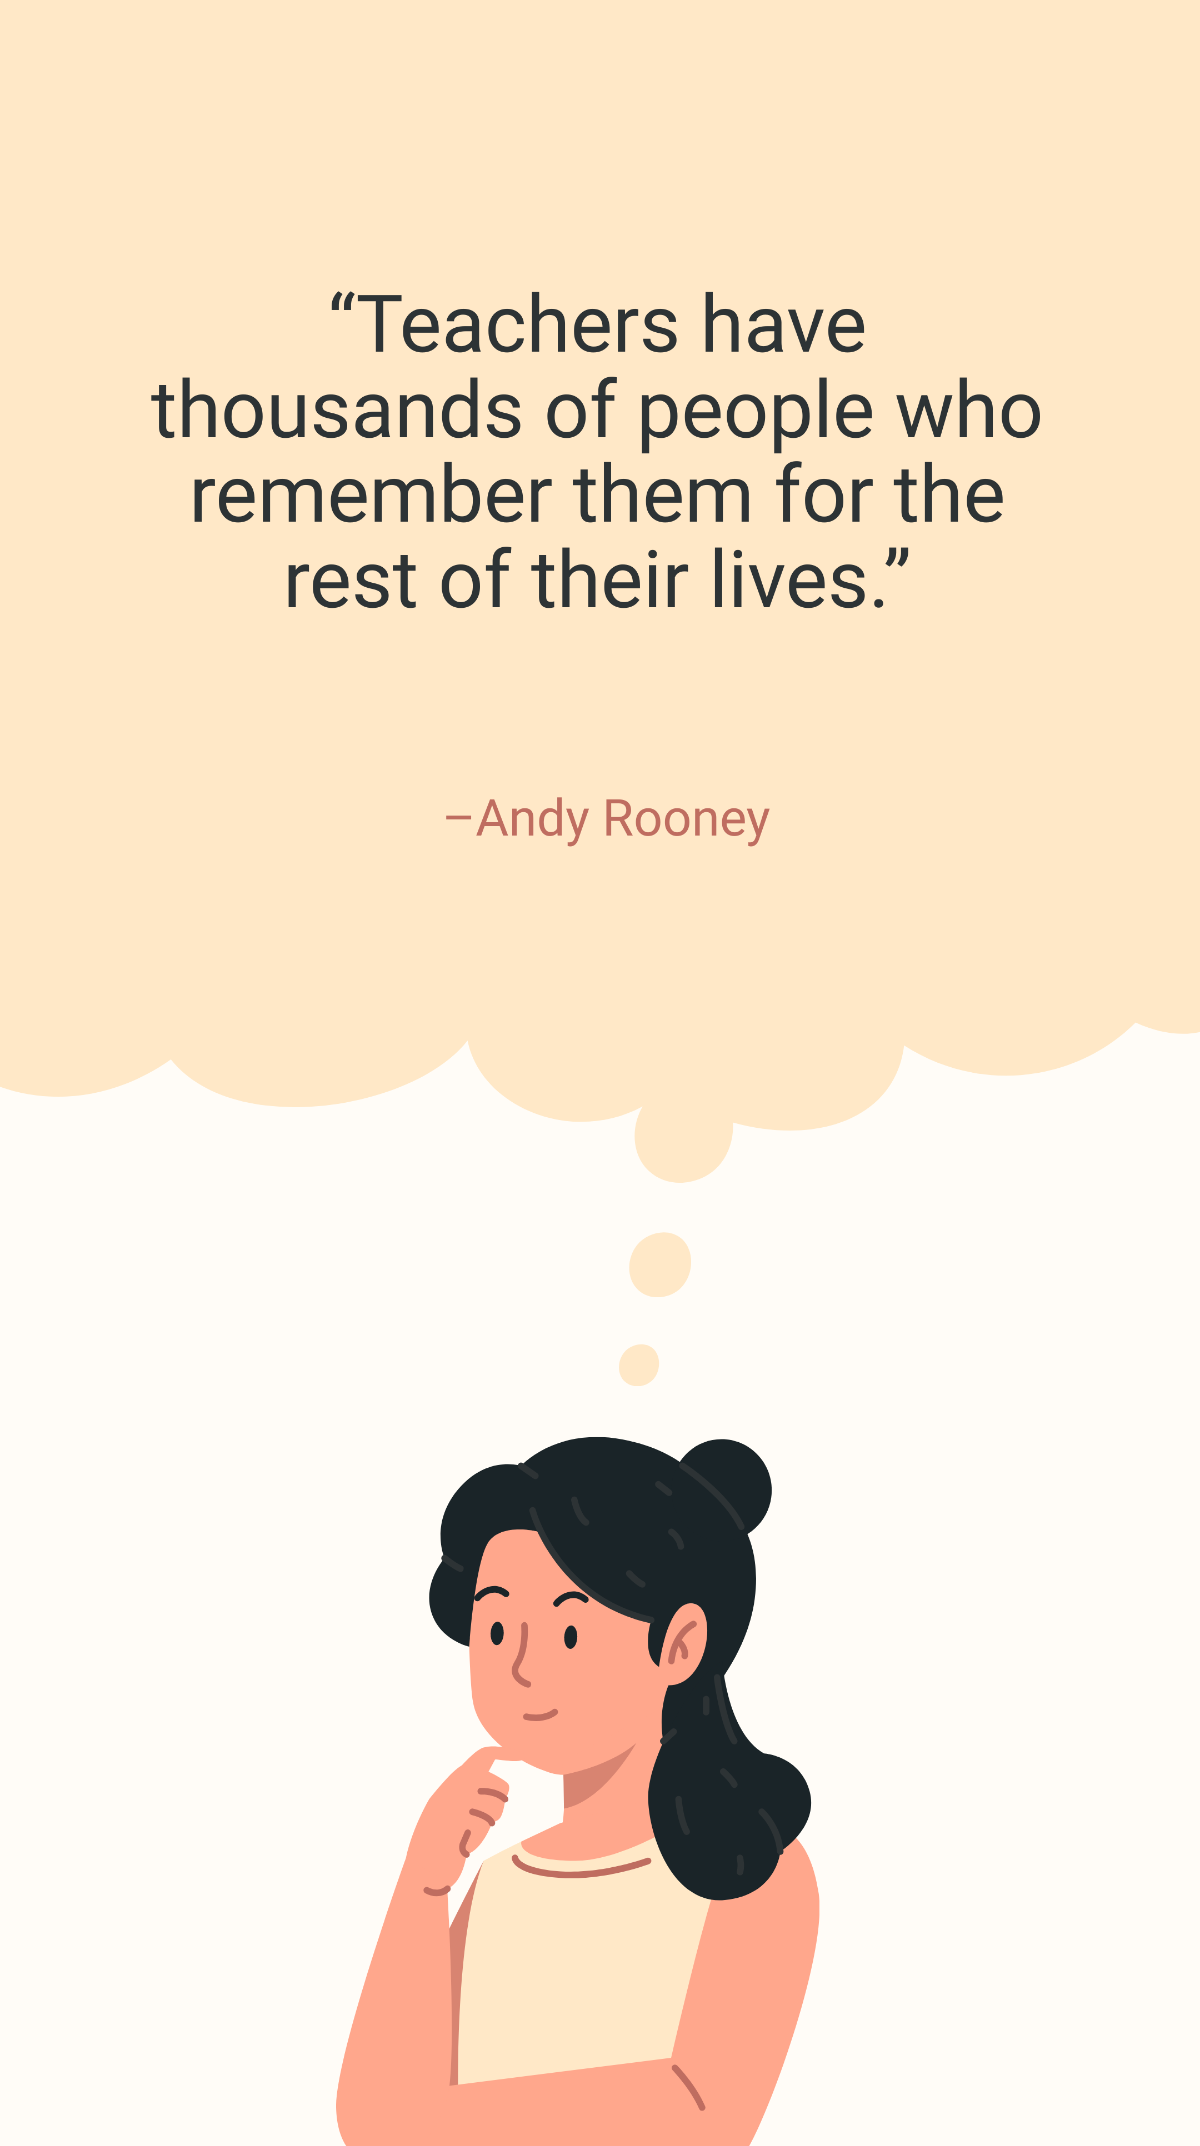 Free Andy Rooney - Teachers have thousands of people who remember them for the rest of their lives. Template